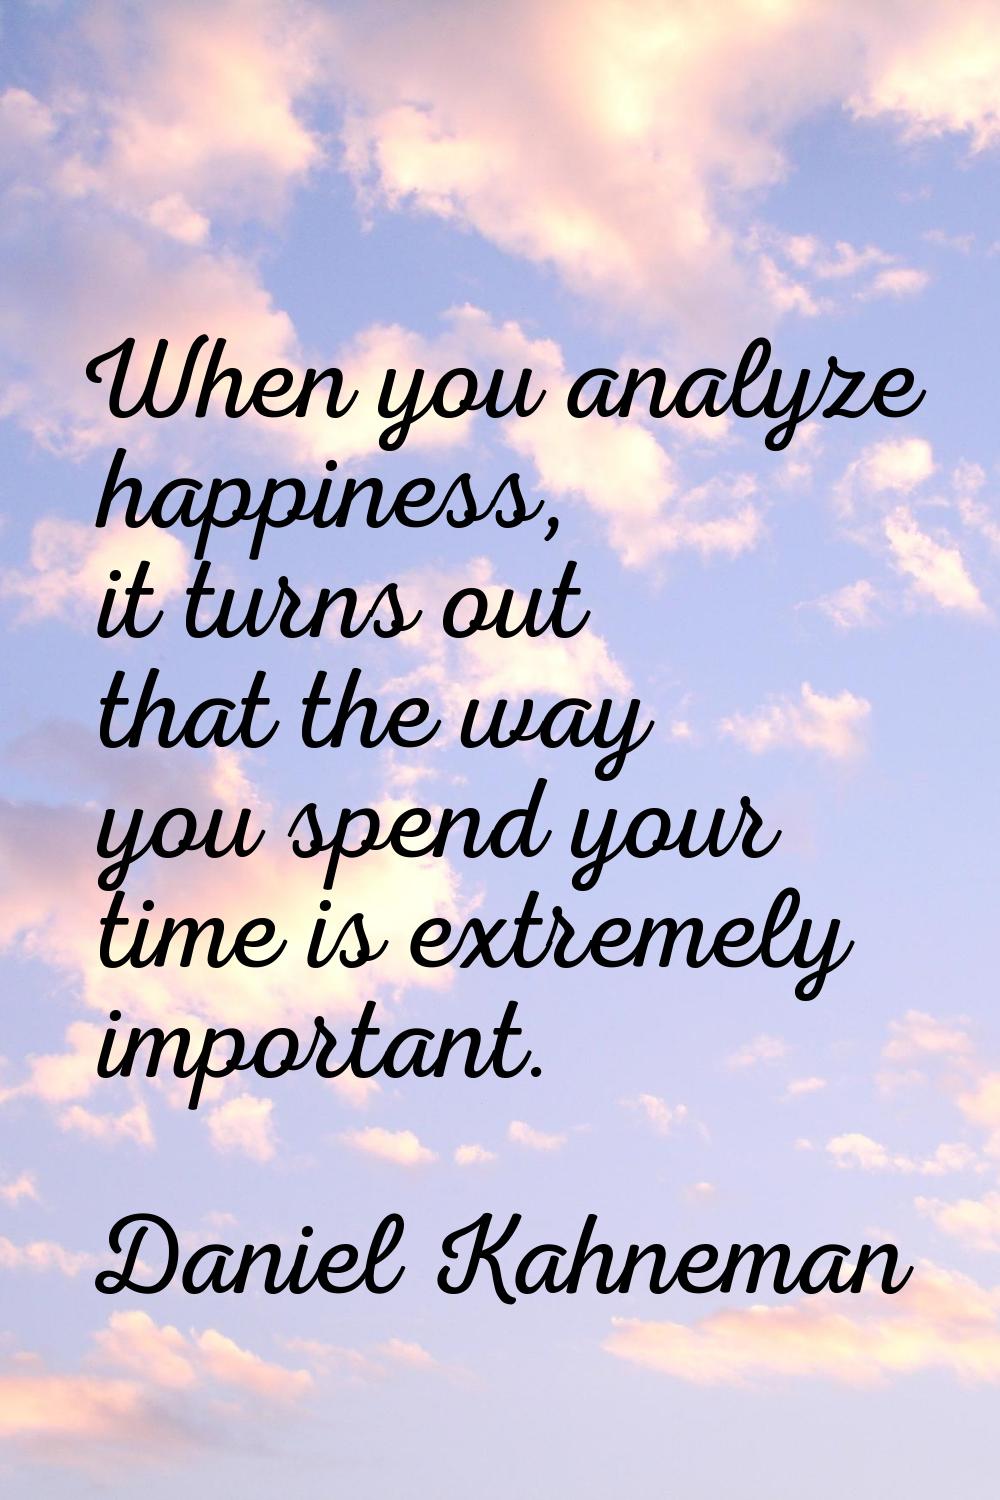 When you analyze happiness, it turns out that the way you spend your time is extremely important.